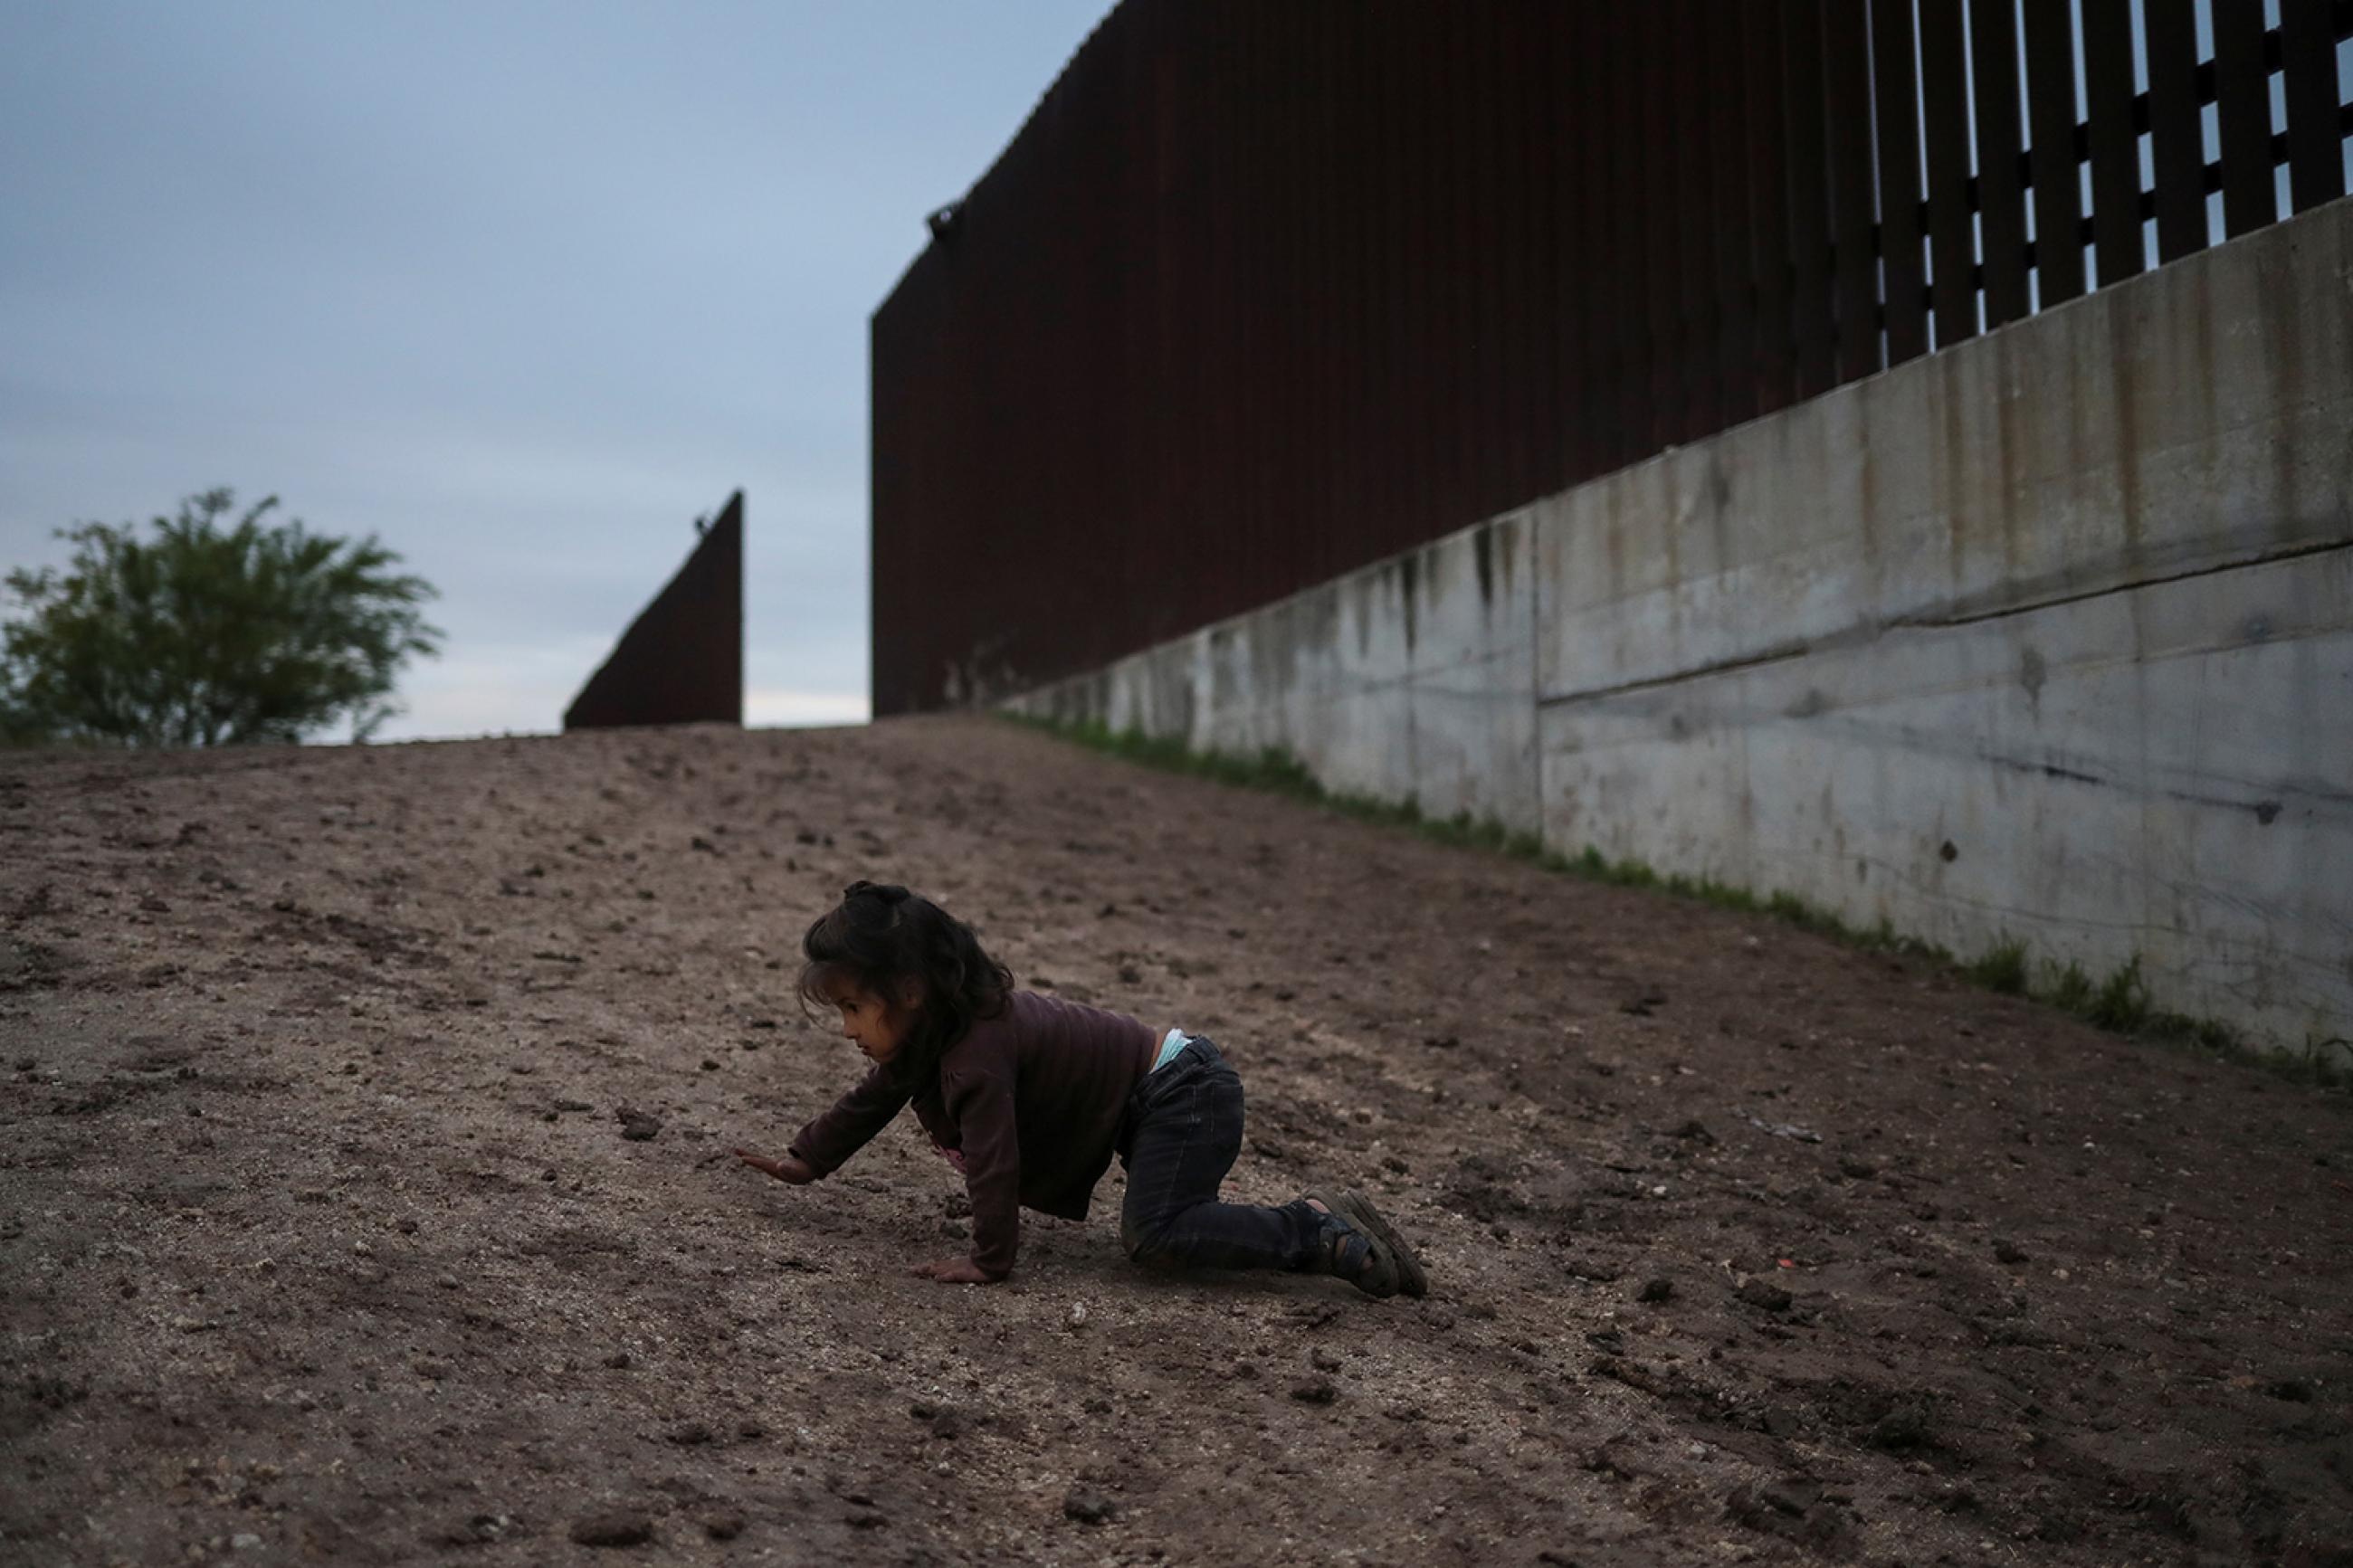 Amy, a two-year-old migrant from Honduras seeking asylum with her parents, crawls on a dirt road after crossing the Rio Grande river into the United States in Penitas, Texas, on April 1, 2019. The photo shows a small child craling on the ground near a giant border fence. REUTERS/Adrees Latif